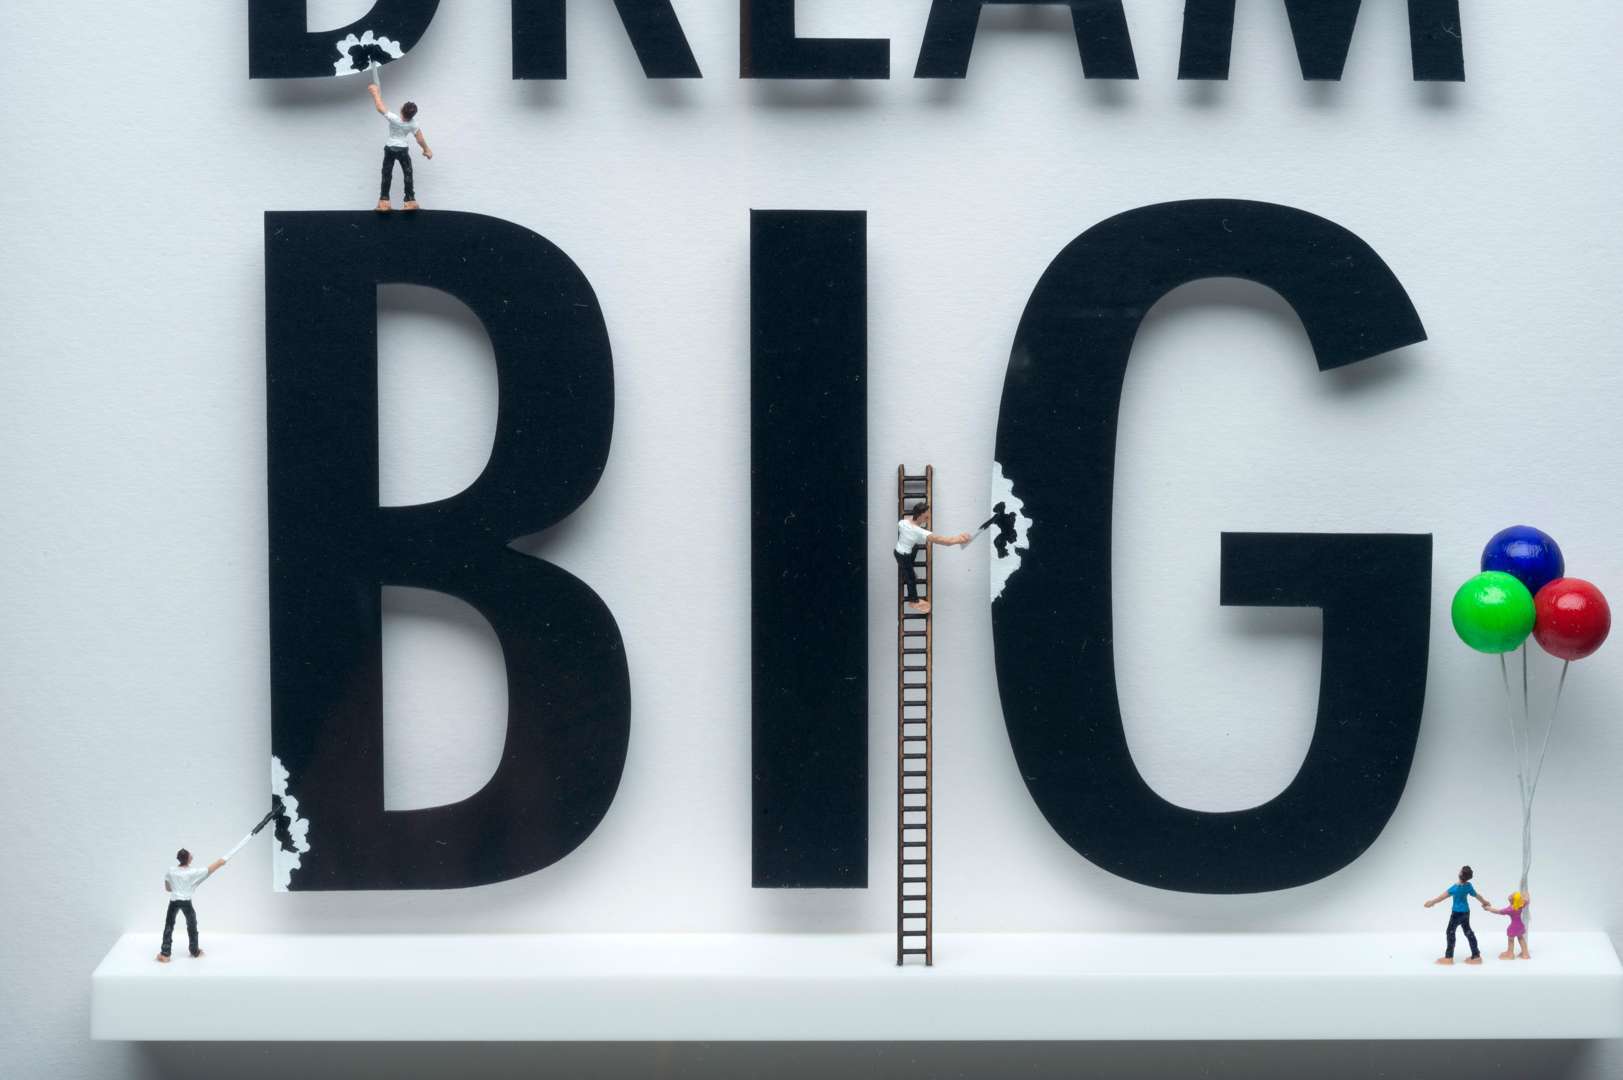 <p>Dream Big wall sculpture by Nic Joly</p>